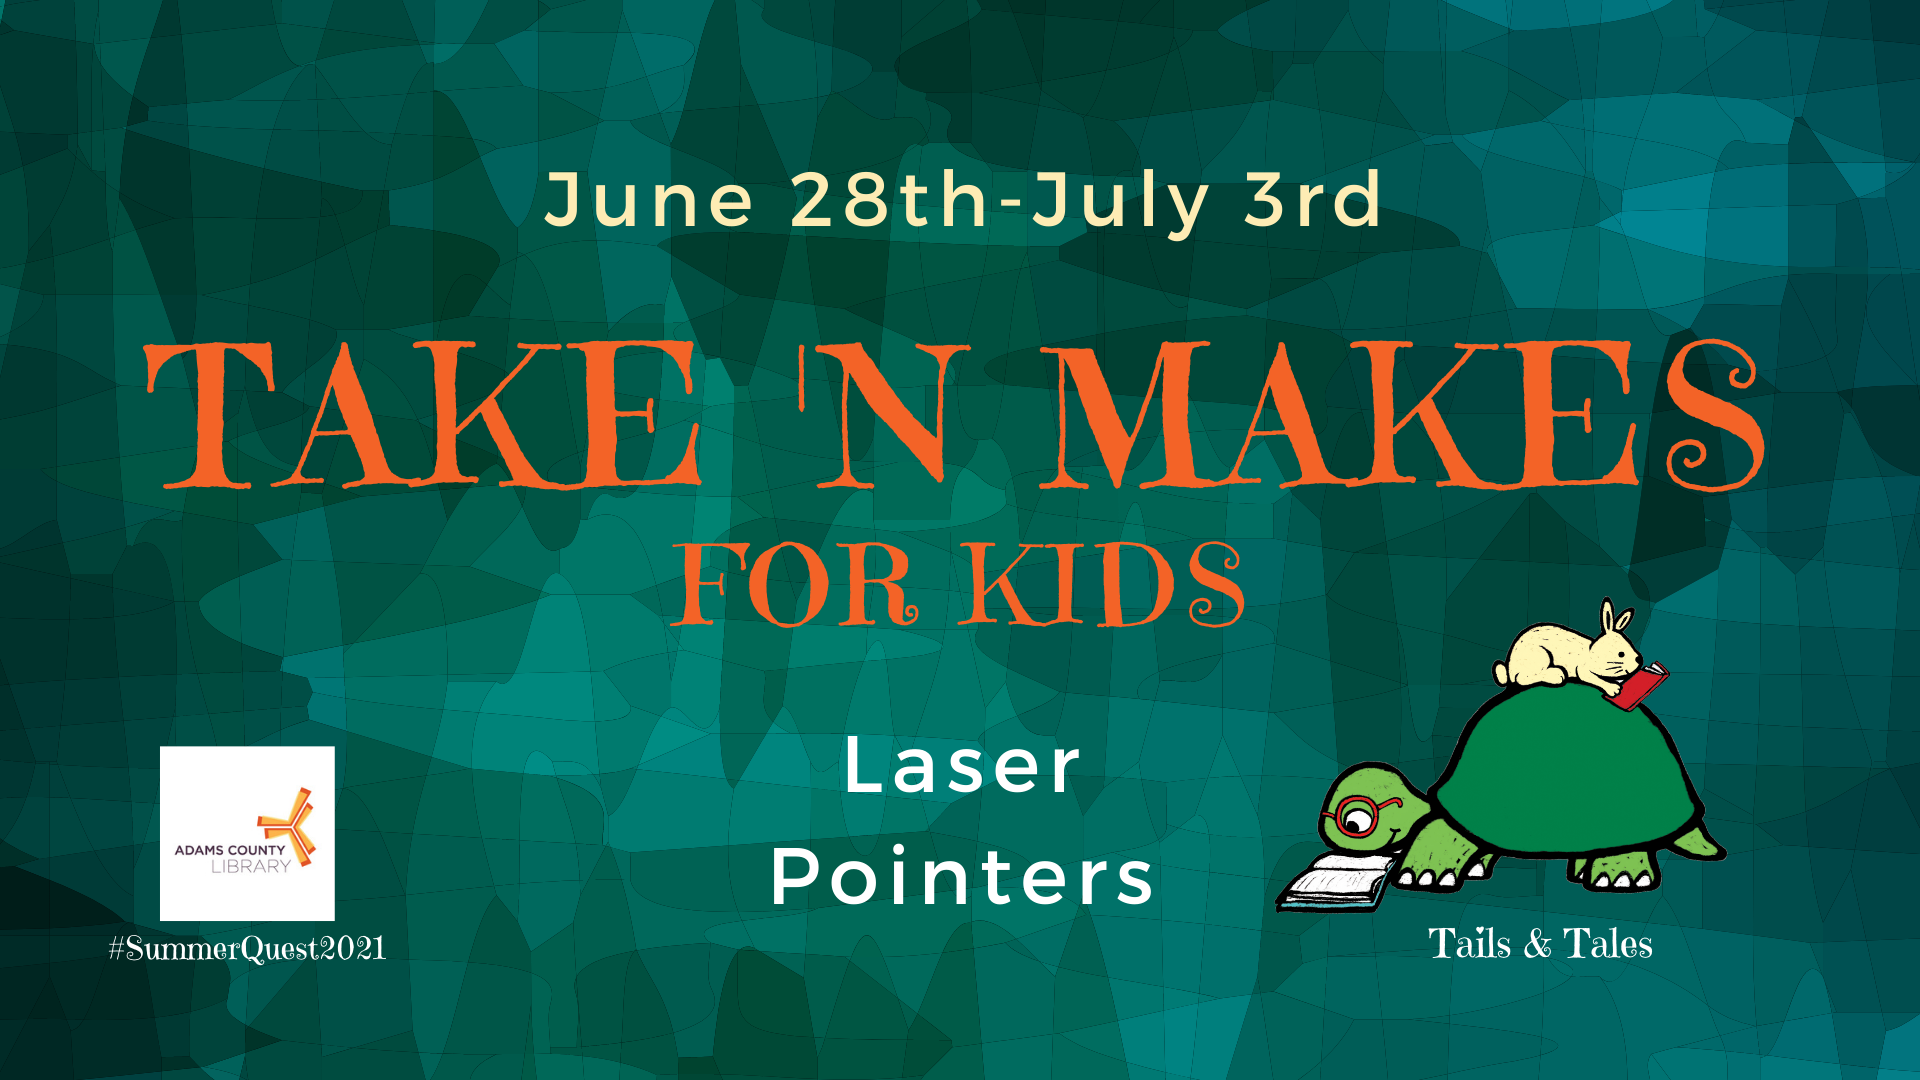 Pick up a Take n' Make for Kids from June 28th through July 3rd. This week the project is Laser Pointers!